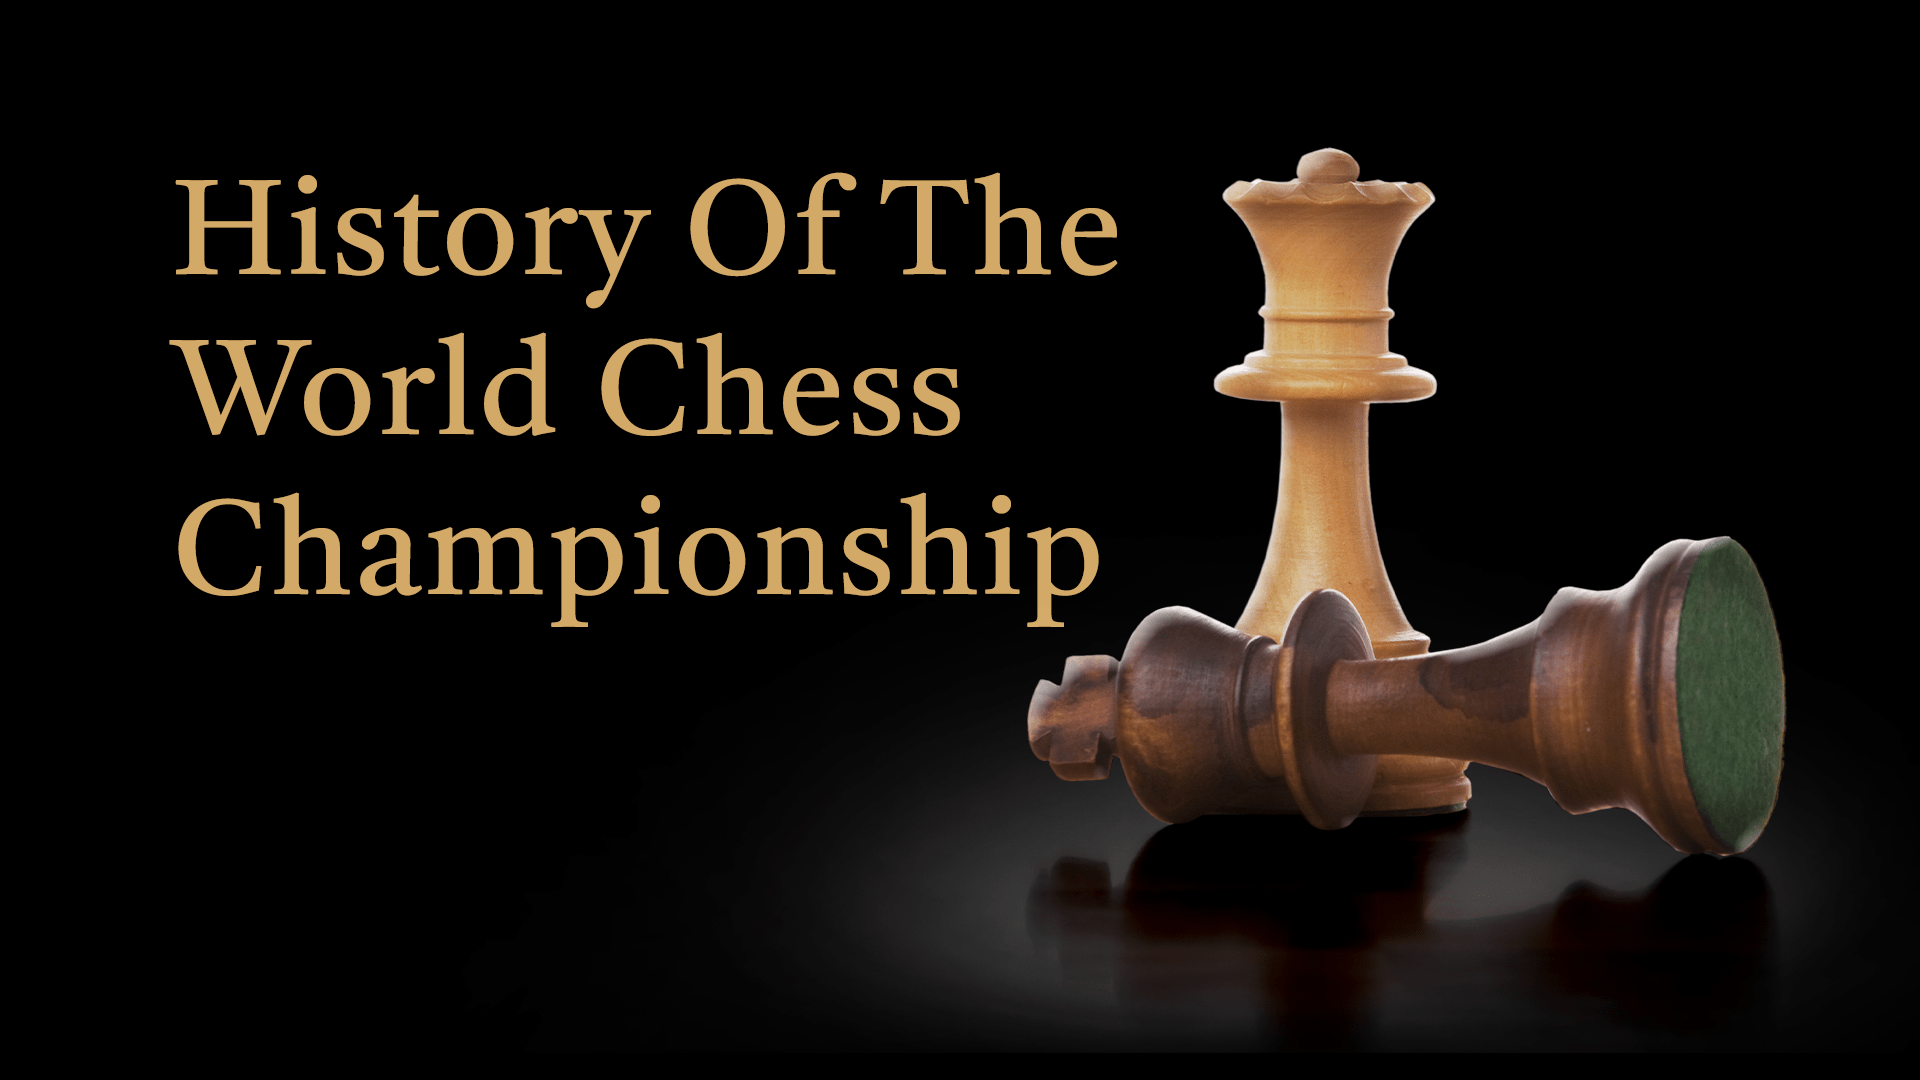 A preview of the 2021 World Chess Championship - The Johns Hopkins